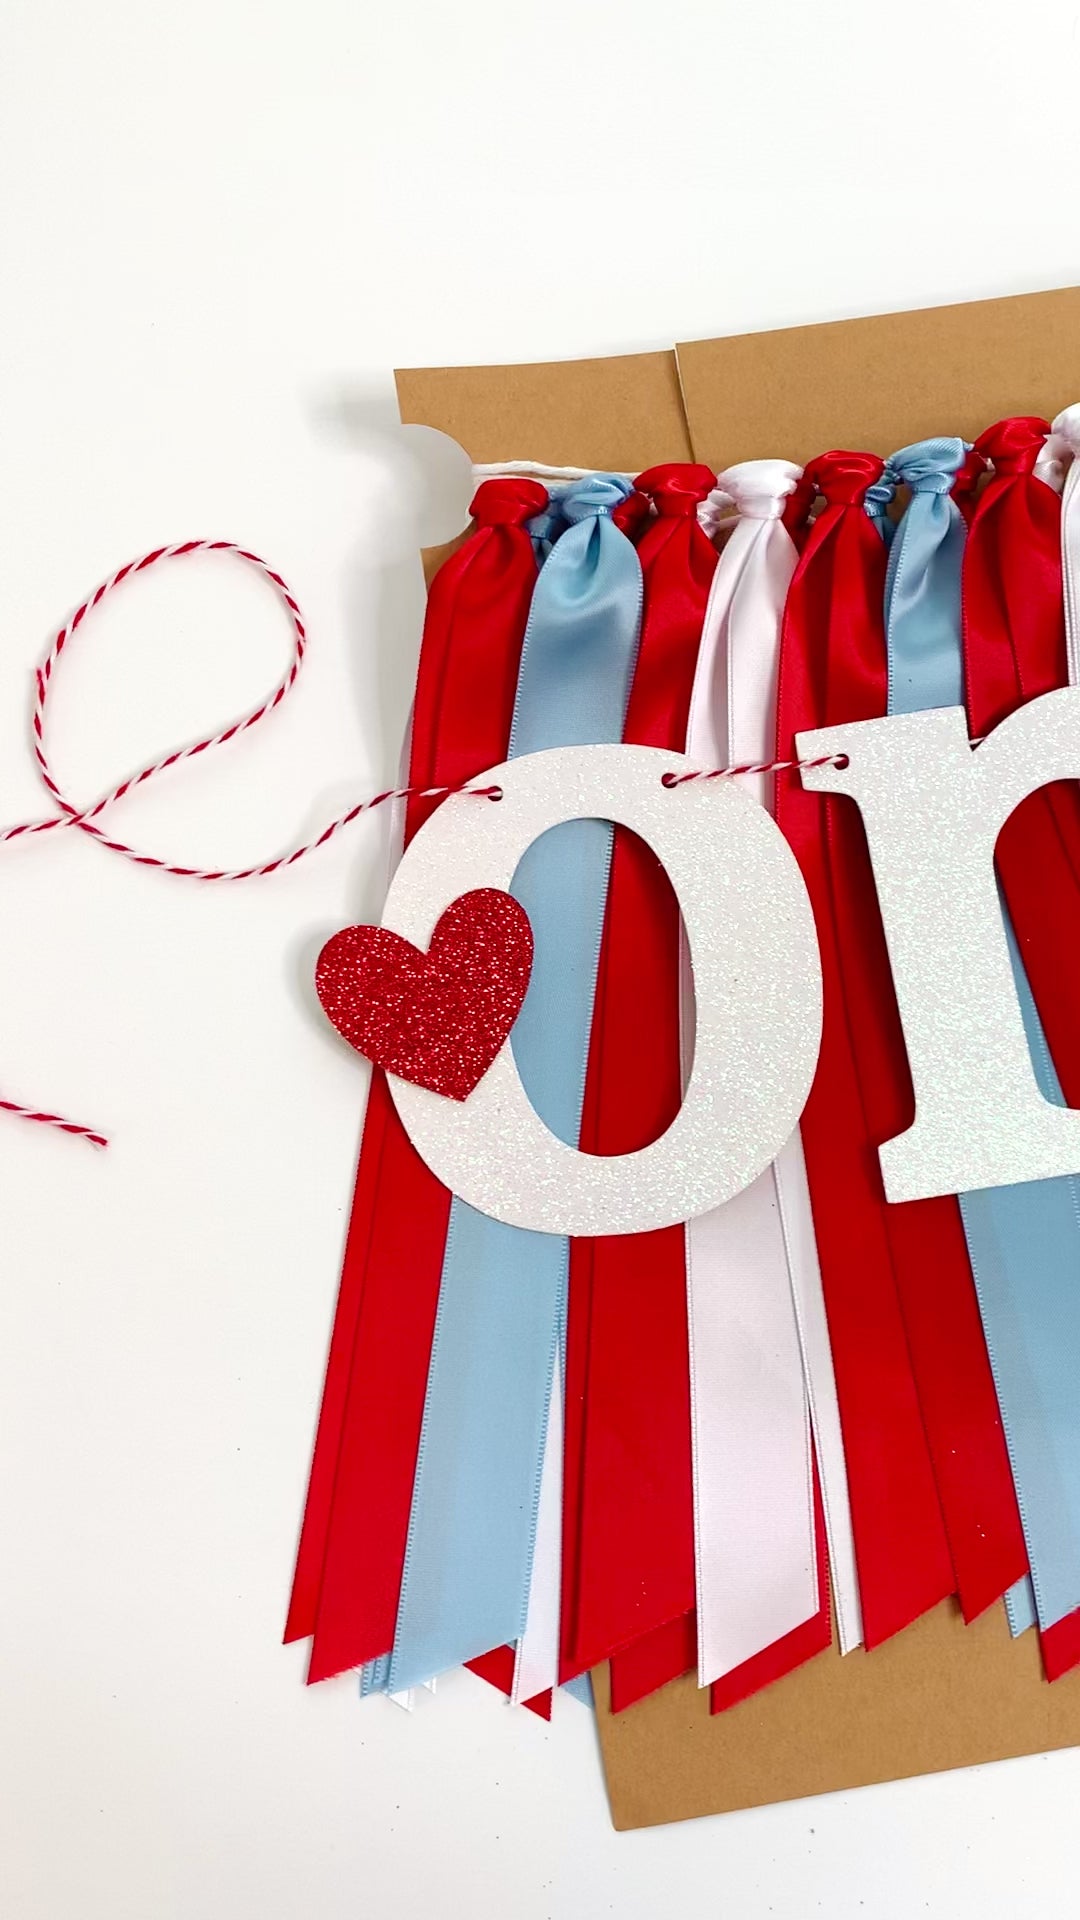 Valentines Little Heart Breaker Boy First Birthday High Chair Banner. Red, White and Light Blue, 1st Birthday Photo Backdrop One Banner. BL